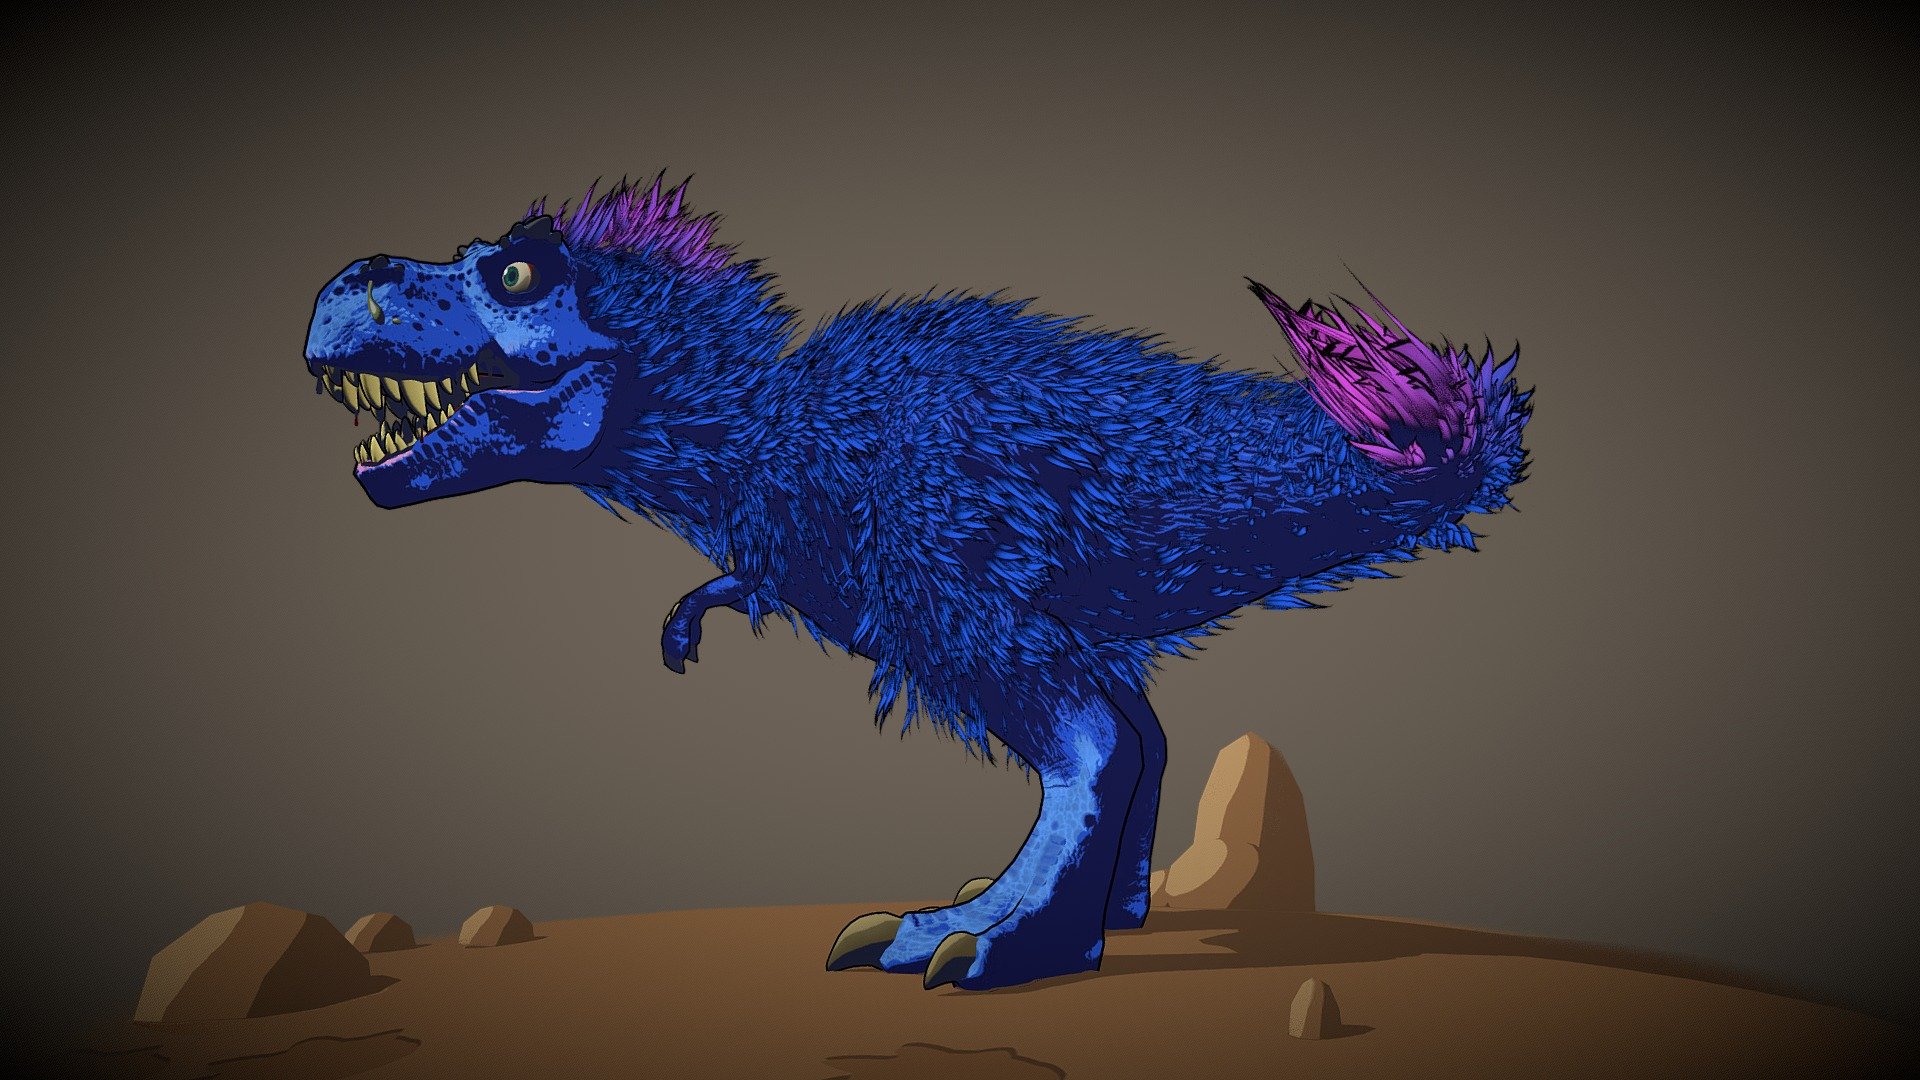 Trex with feather 3d comic toon version

You can see this artwork rendered in Blender here:
https://www.artstation.com/artwork/m8nW2Y - Comic-toon trex - 3D model by creatureFab (@3dCoast) 3d model